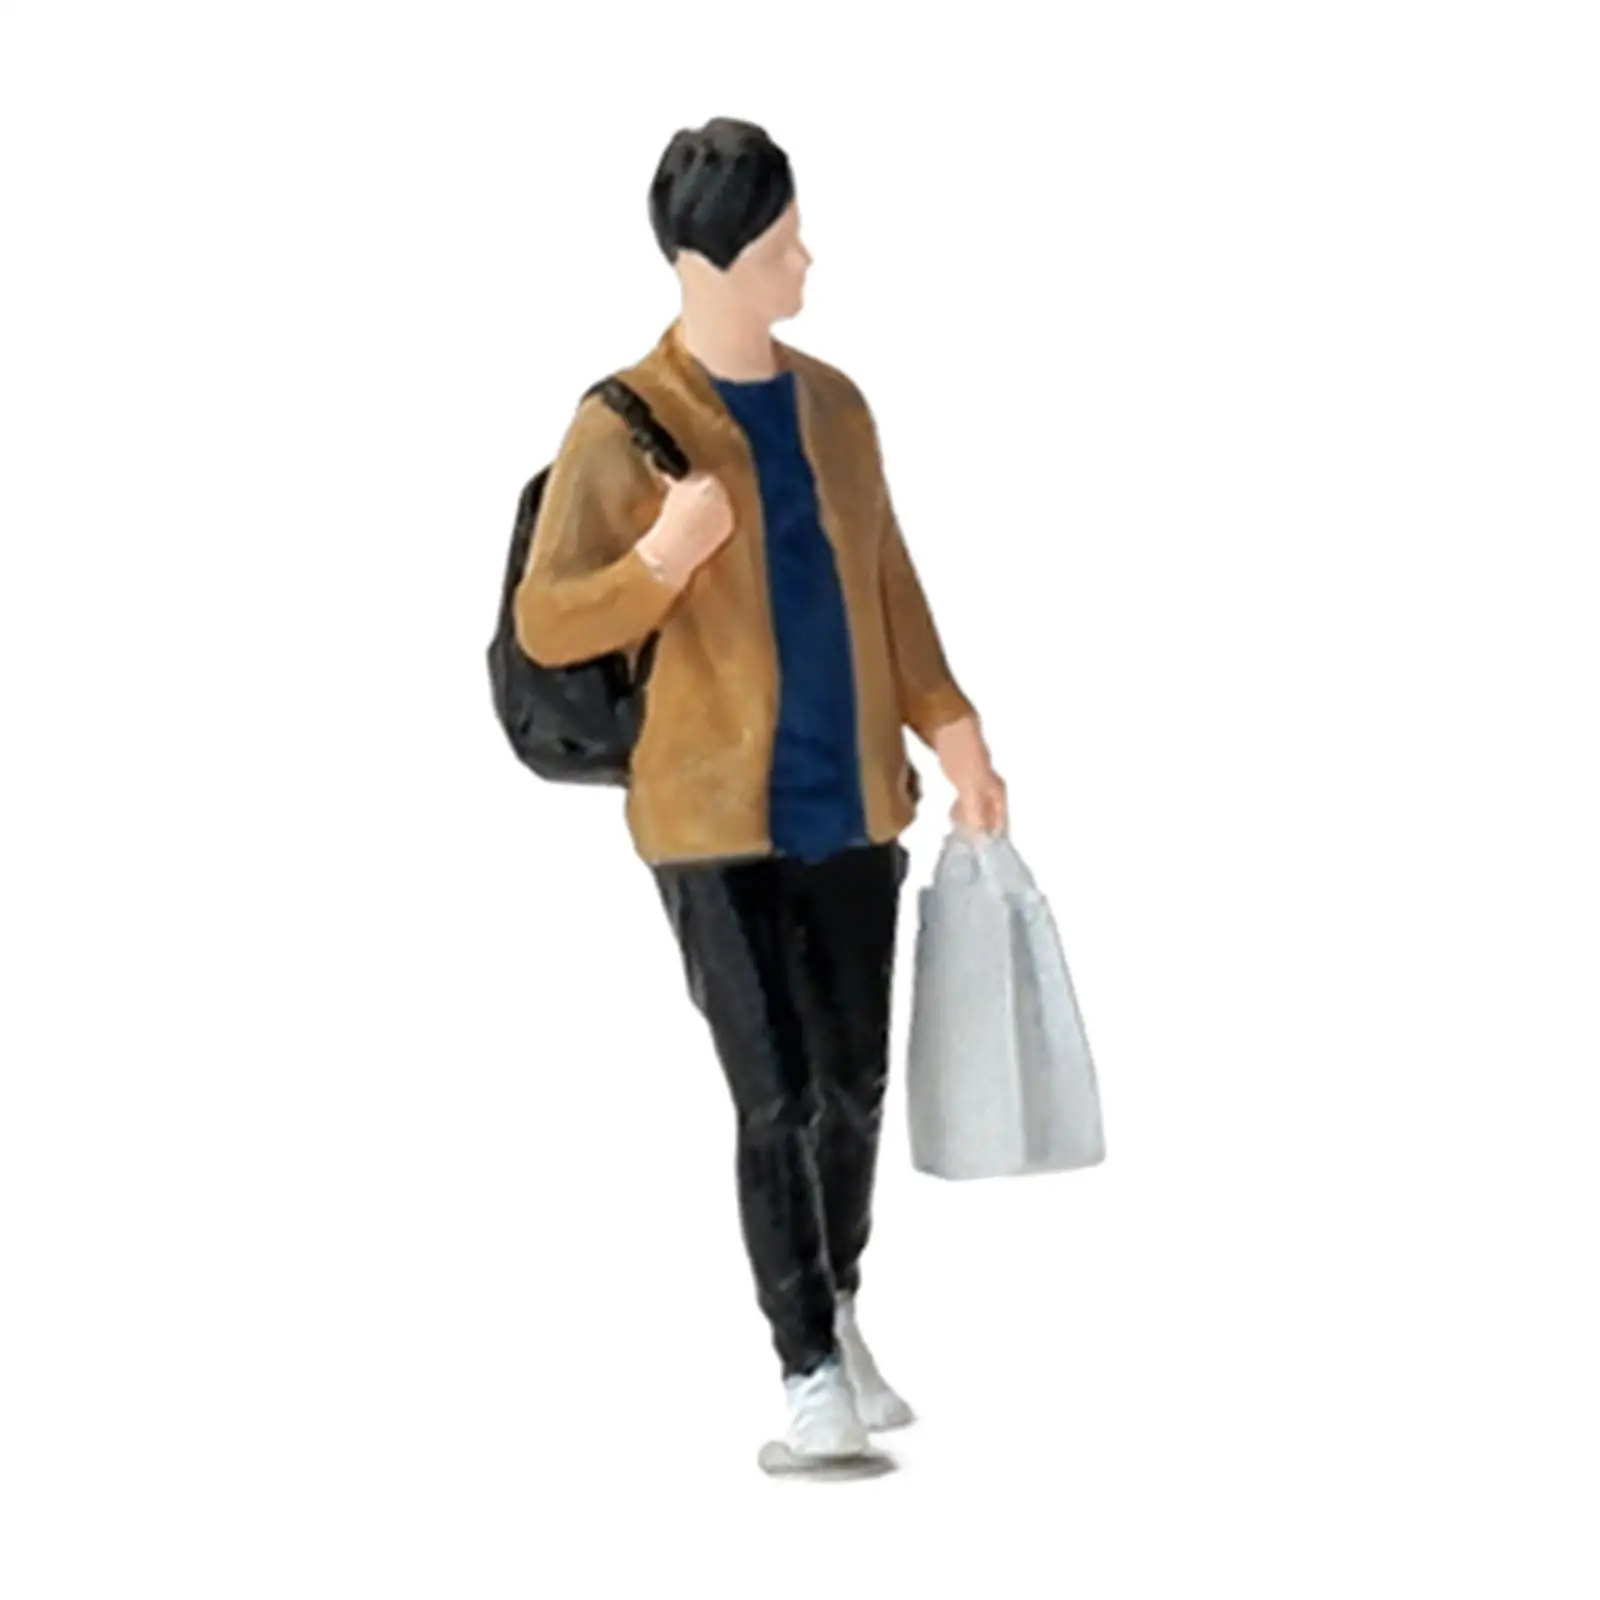 Mini Diorama Street Character Figure Collectibles with Backpack and Lunch Bags Model Trains People Figures for Scenery Landscape